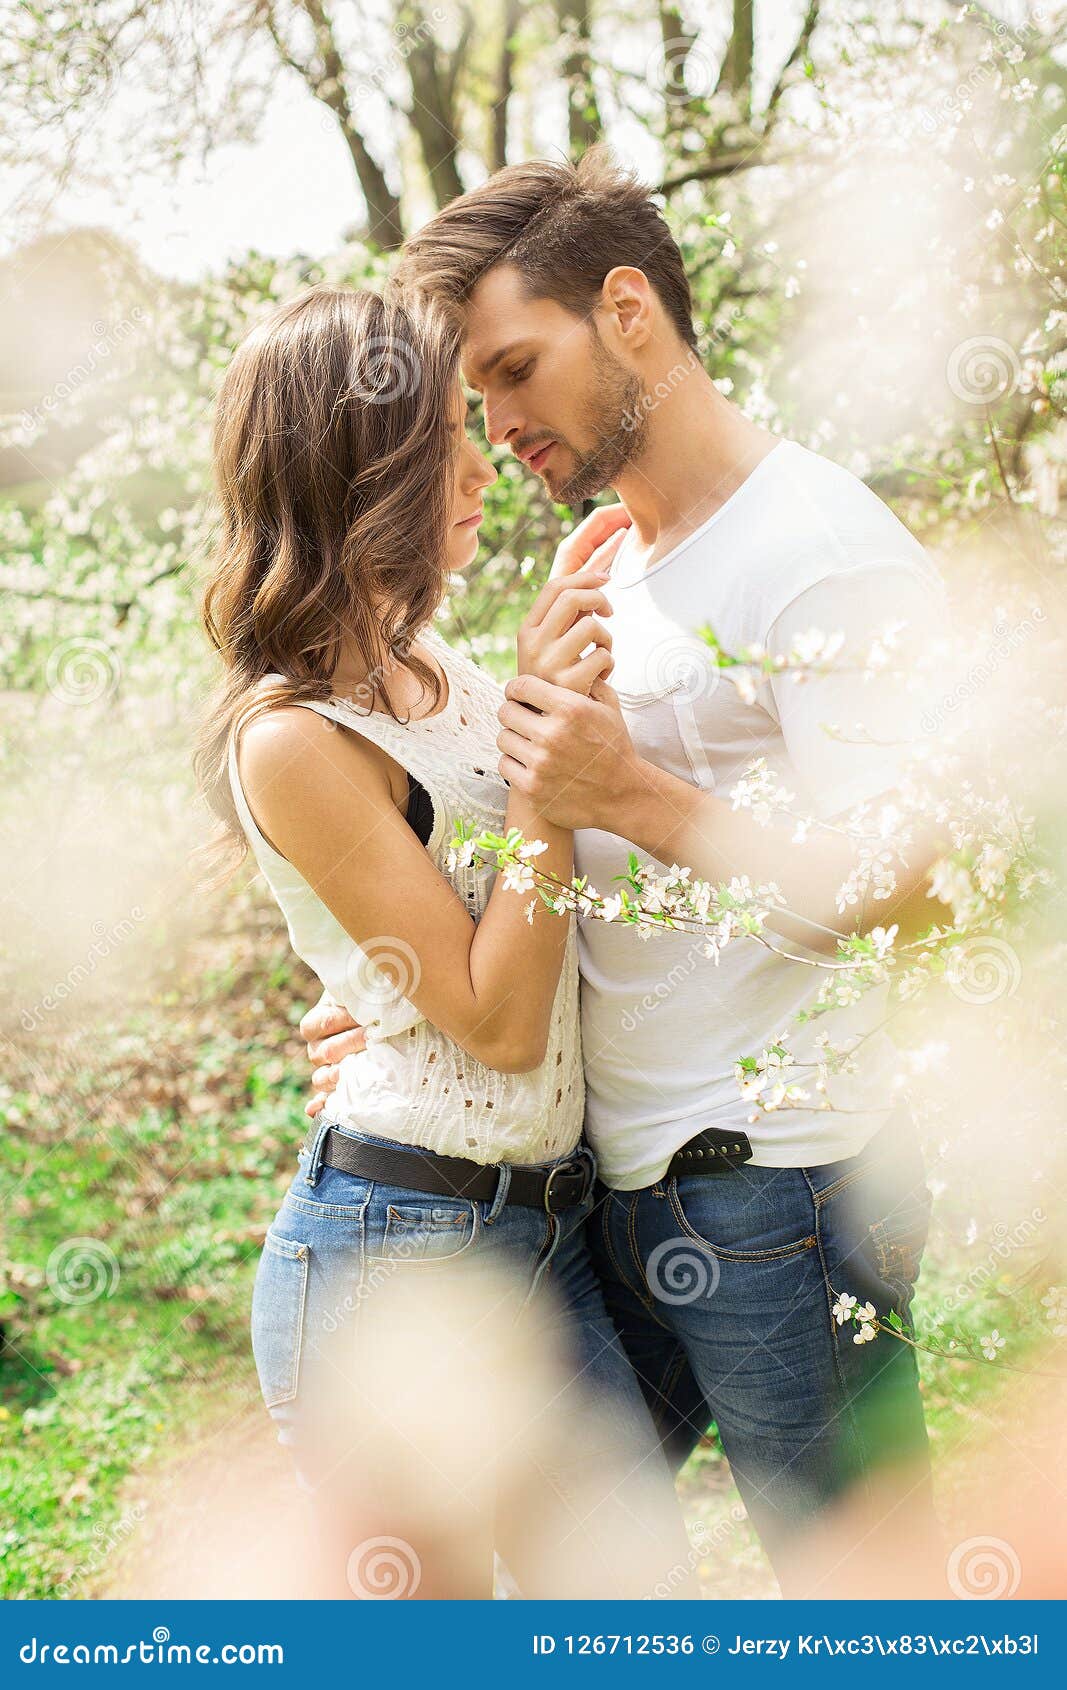 Cute Couple Touching Each Other in the Blooming Garden Stock Photo ...